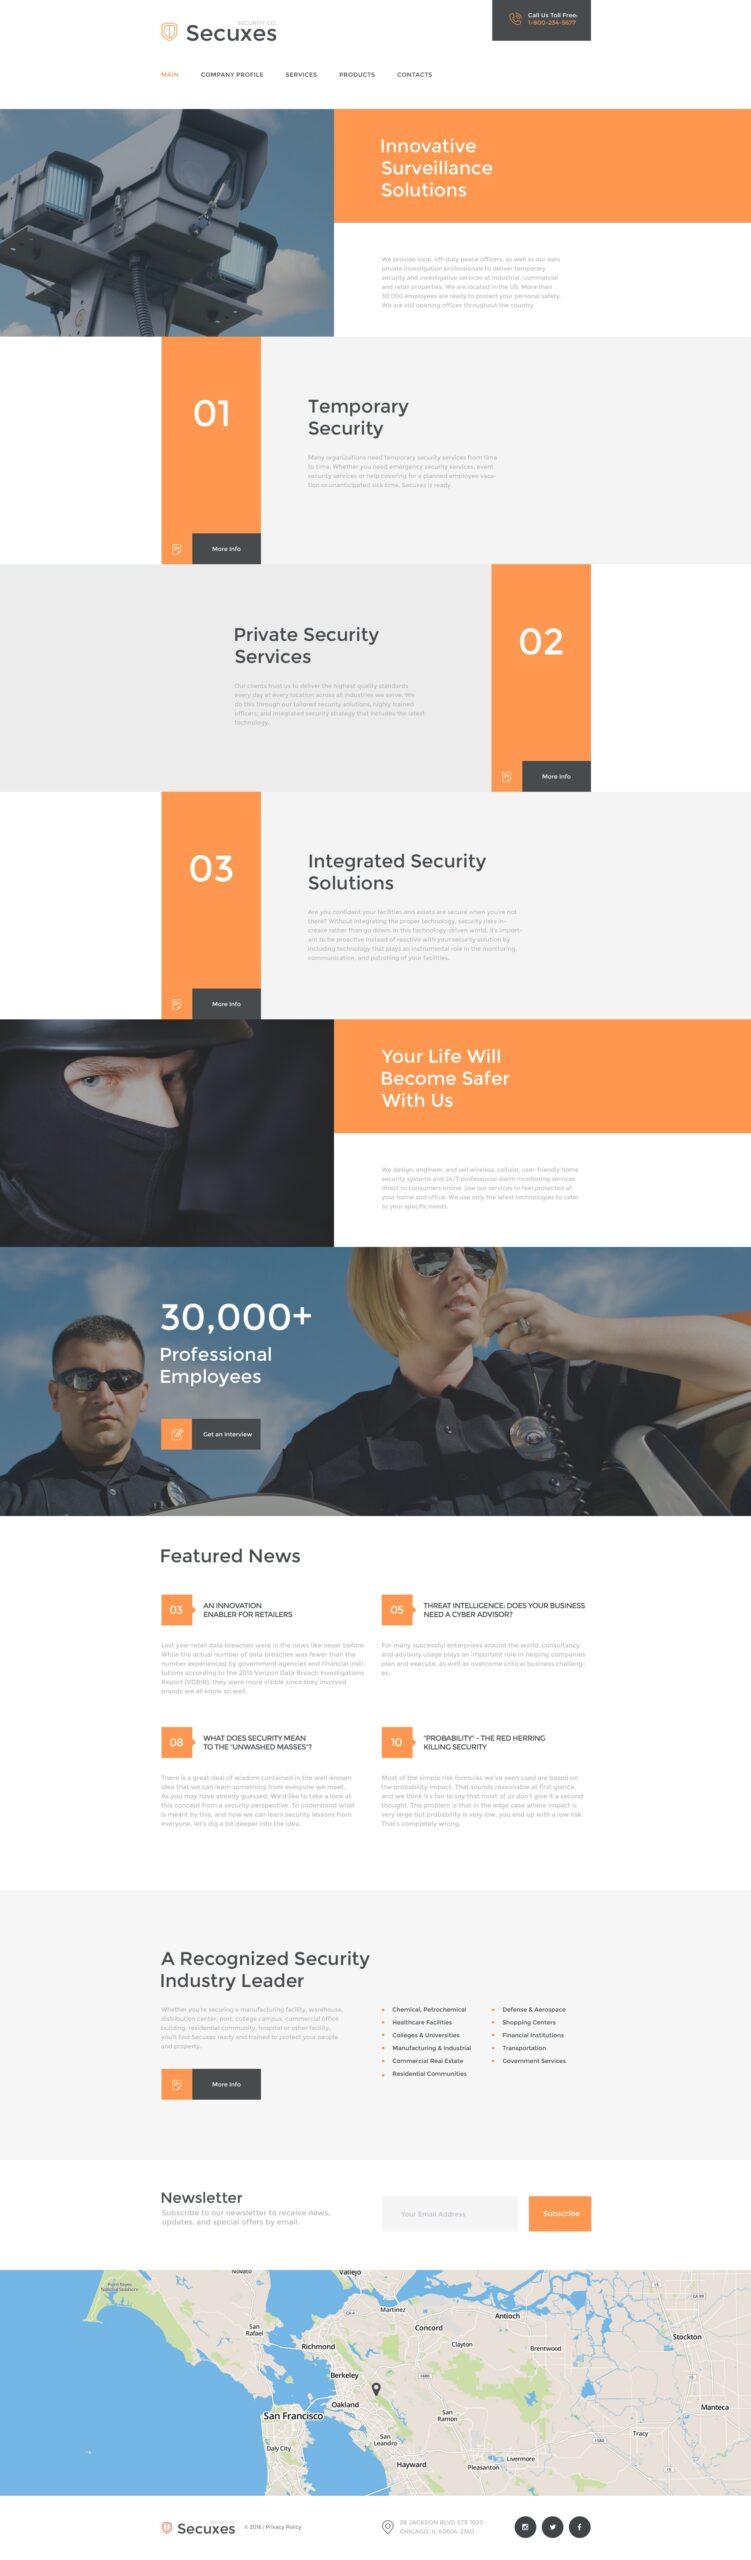 Secuxes Website Template